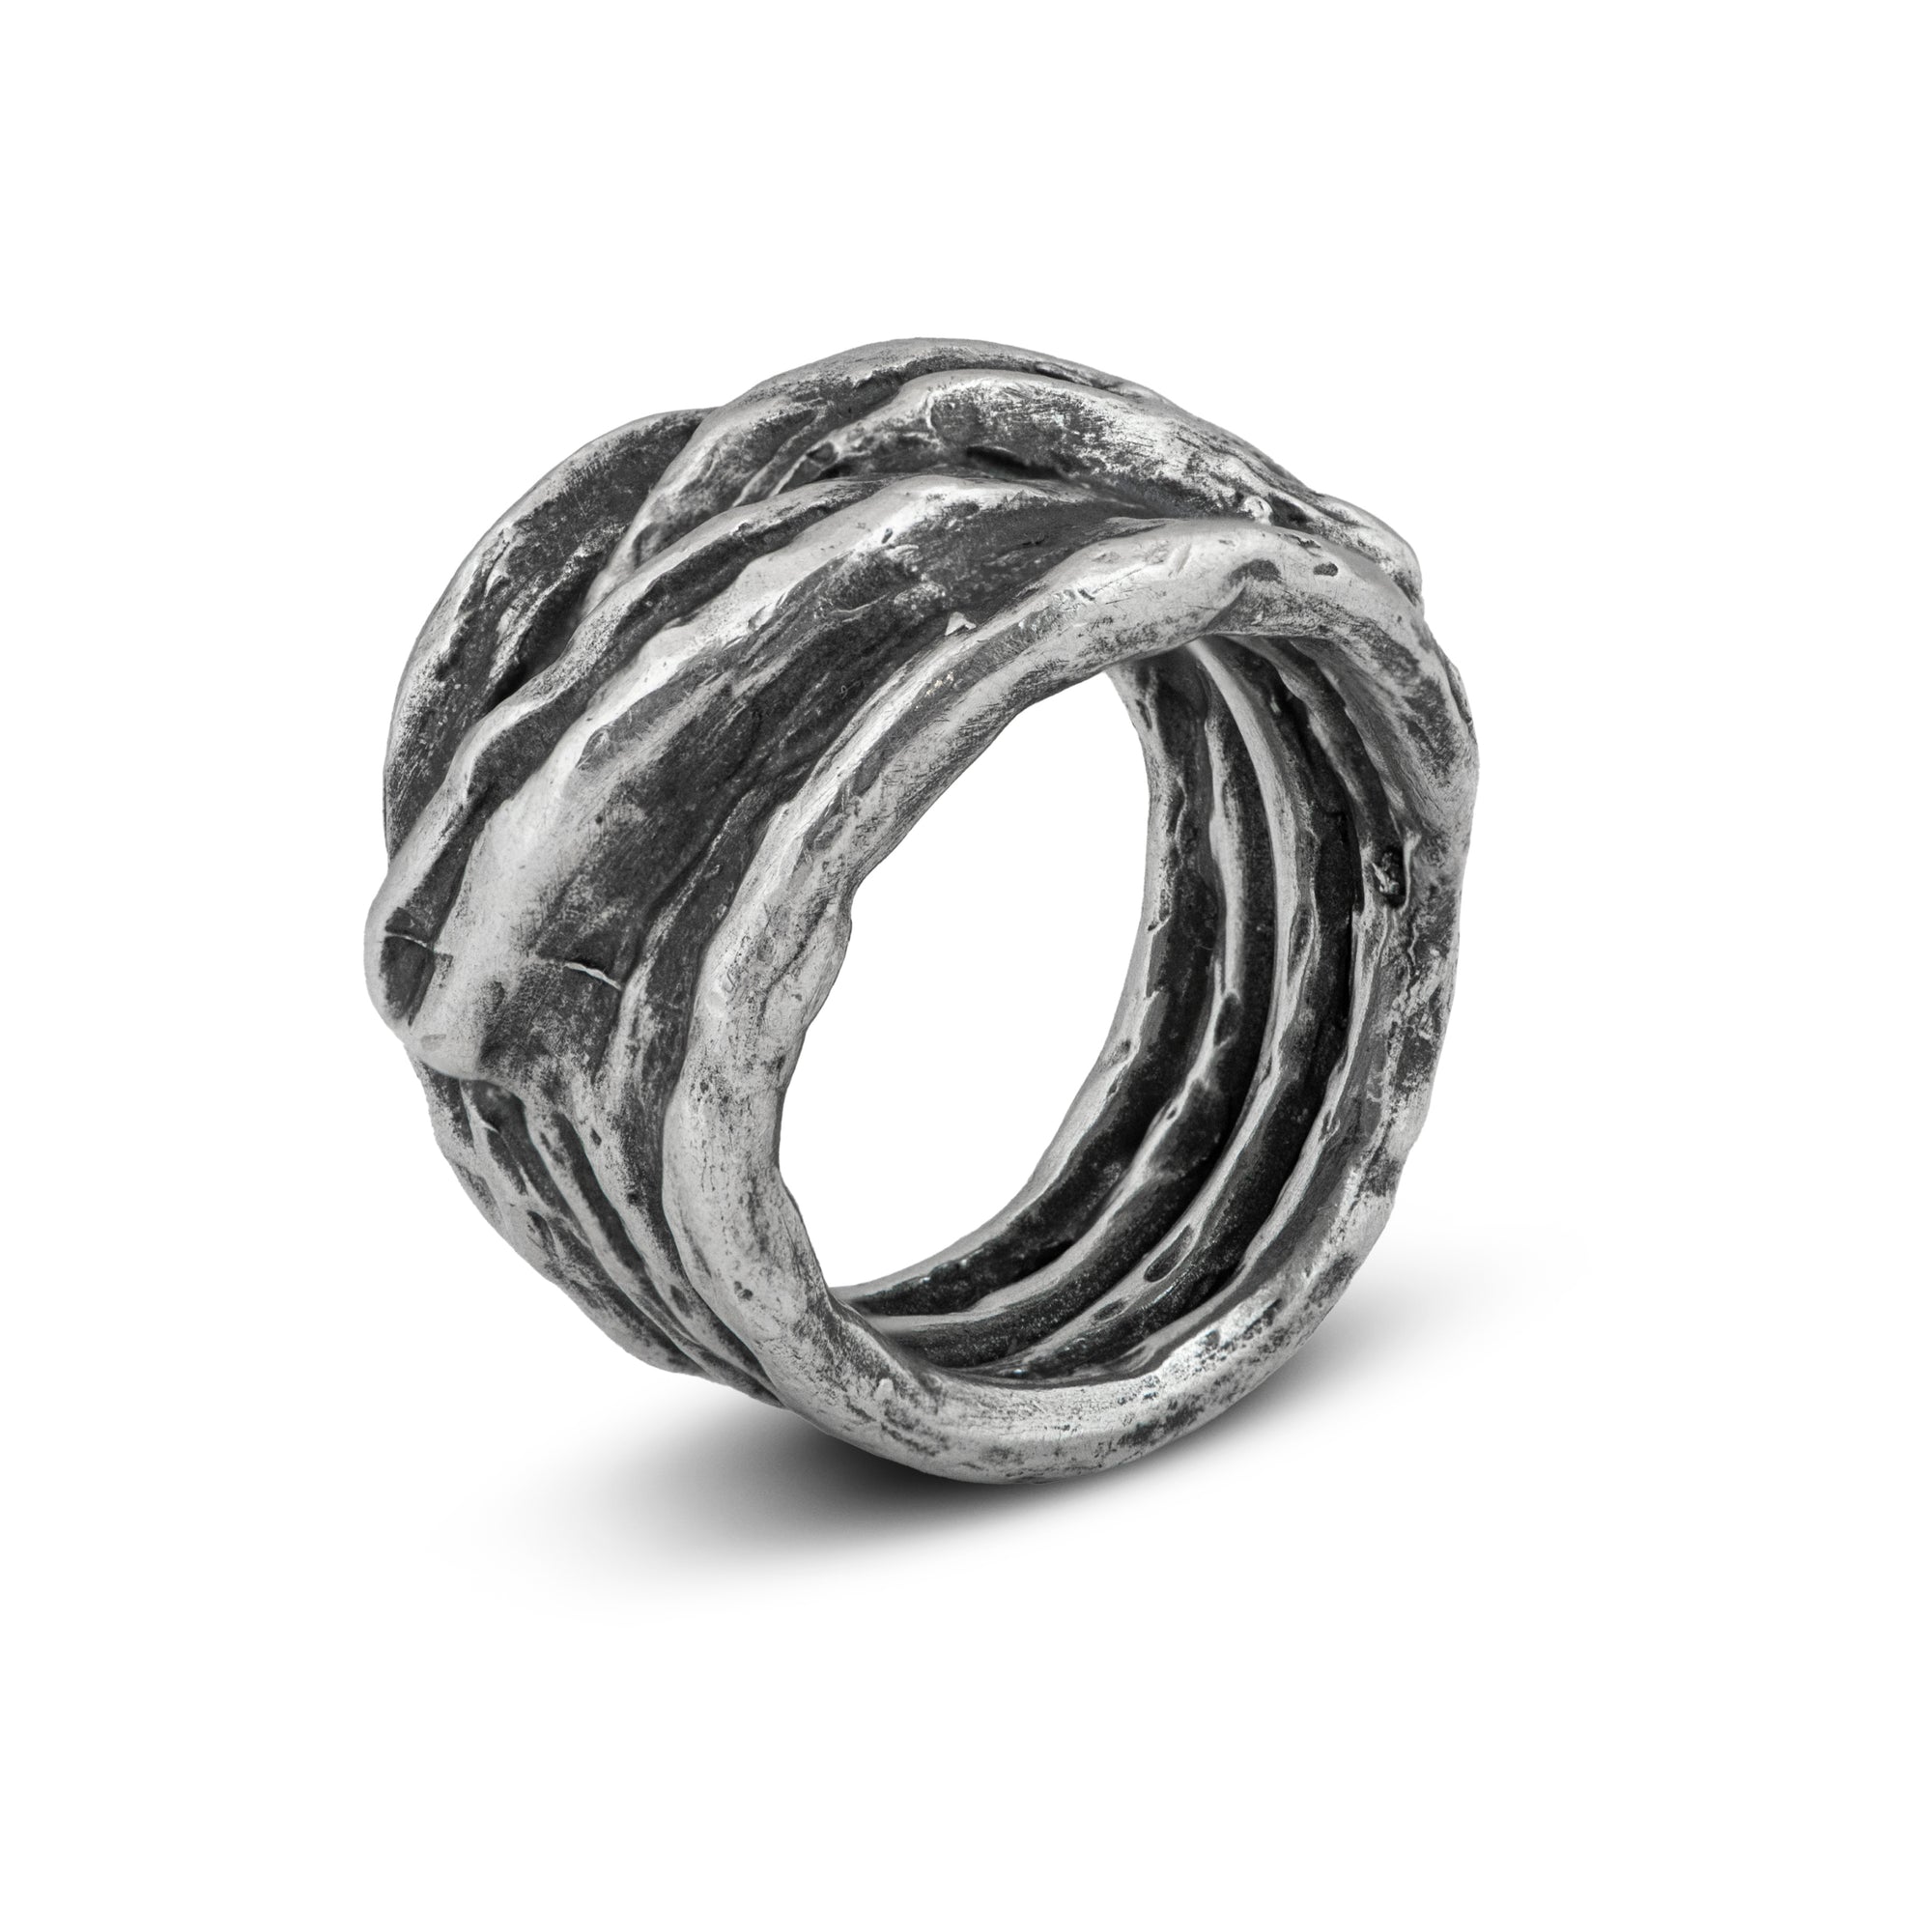 Silver Ring "Crossing paths"